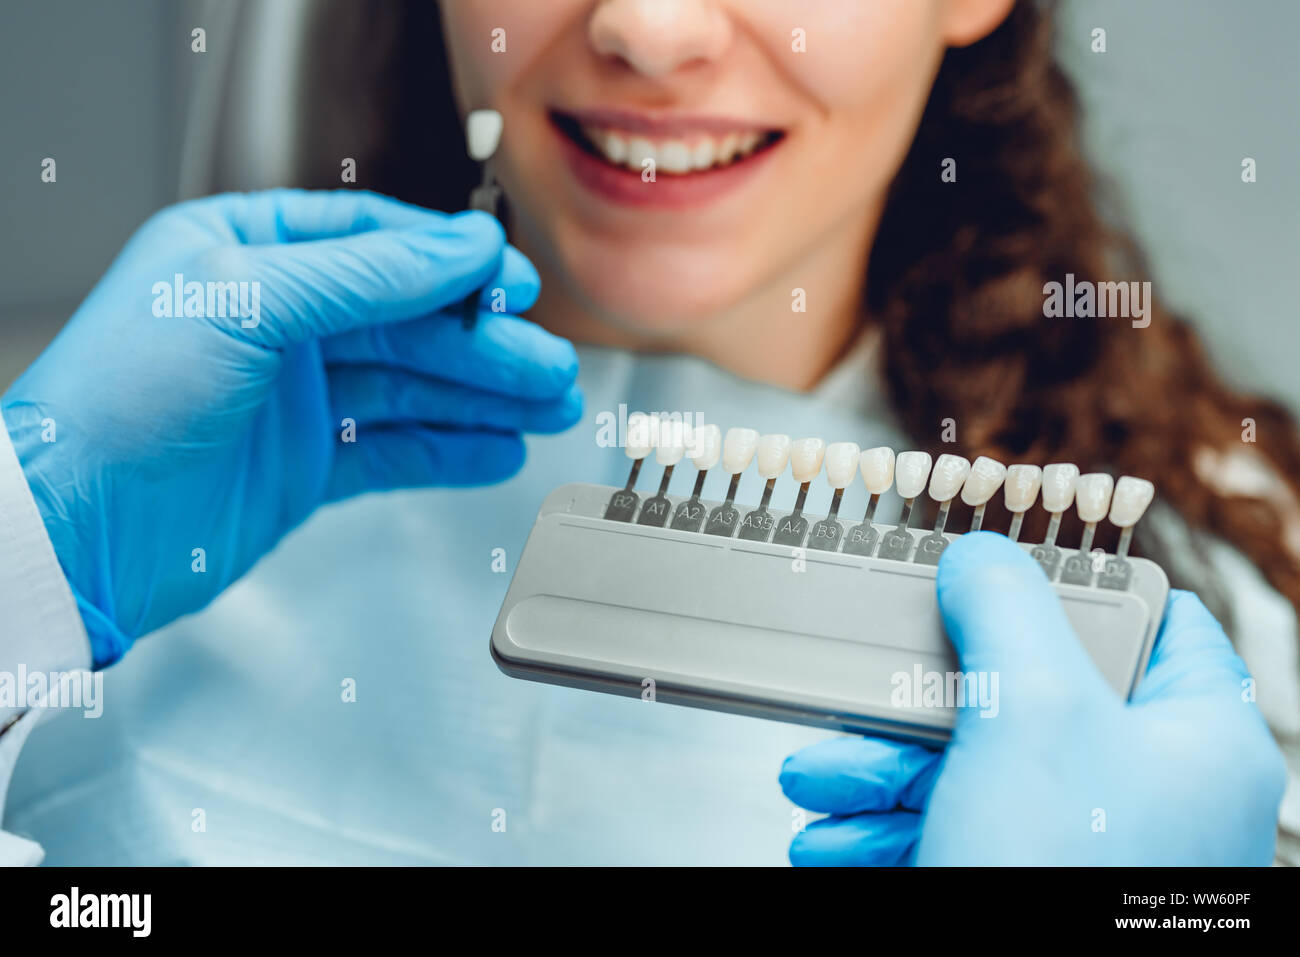 Dentist selecting patient's teeth color with palette in clinic, close up view. Stock Photo